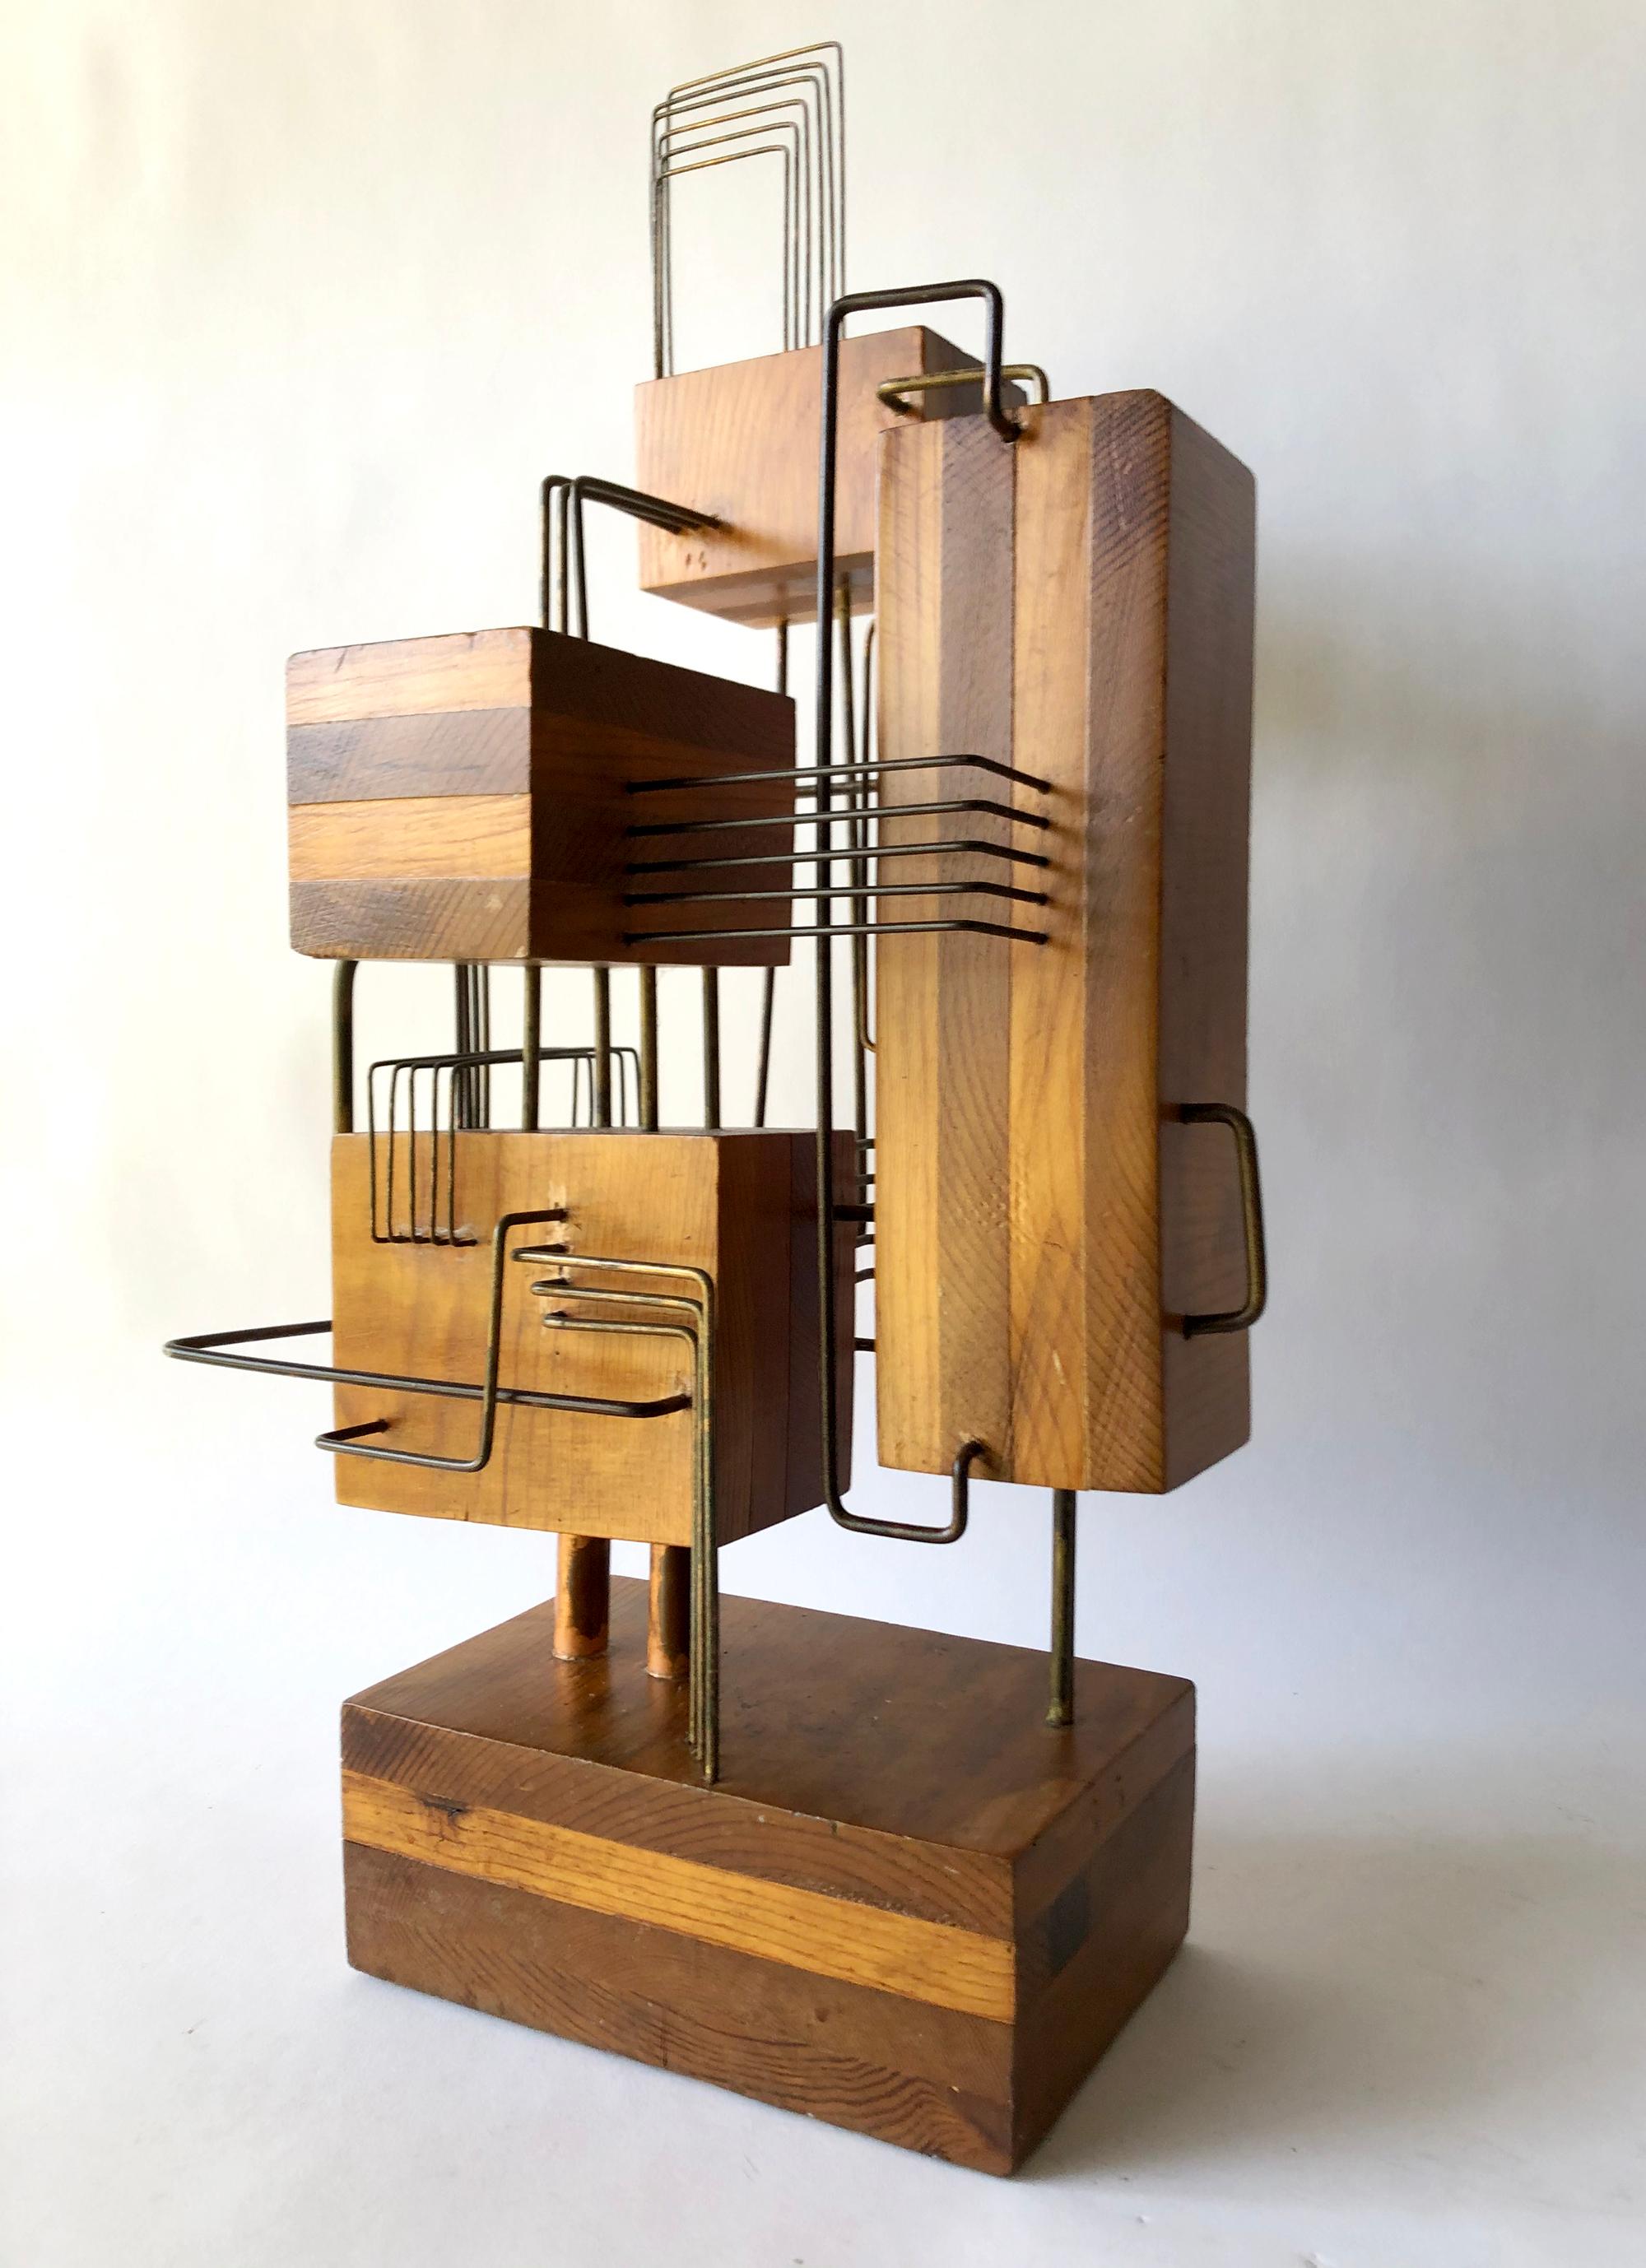 Handmade, constructivist inspired wood and copper wire sculpture created in 1987 by Yosh. Sculpture stands 23.5